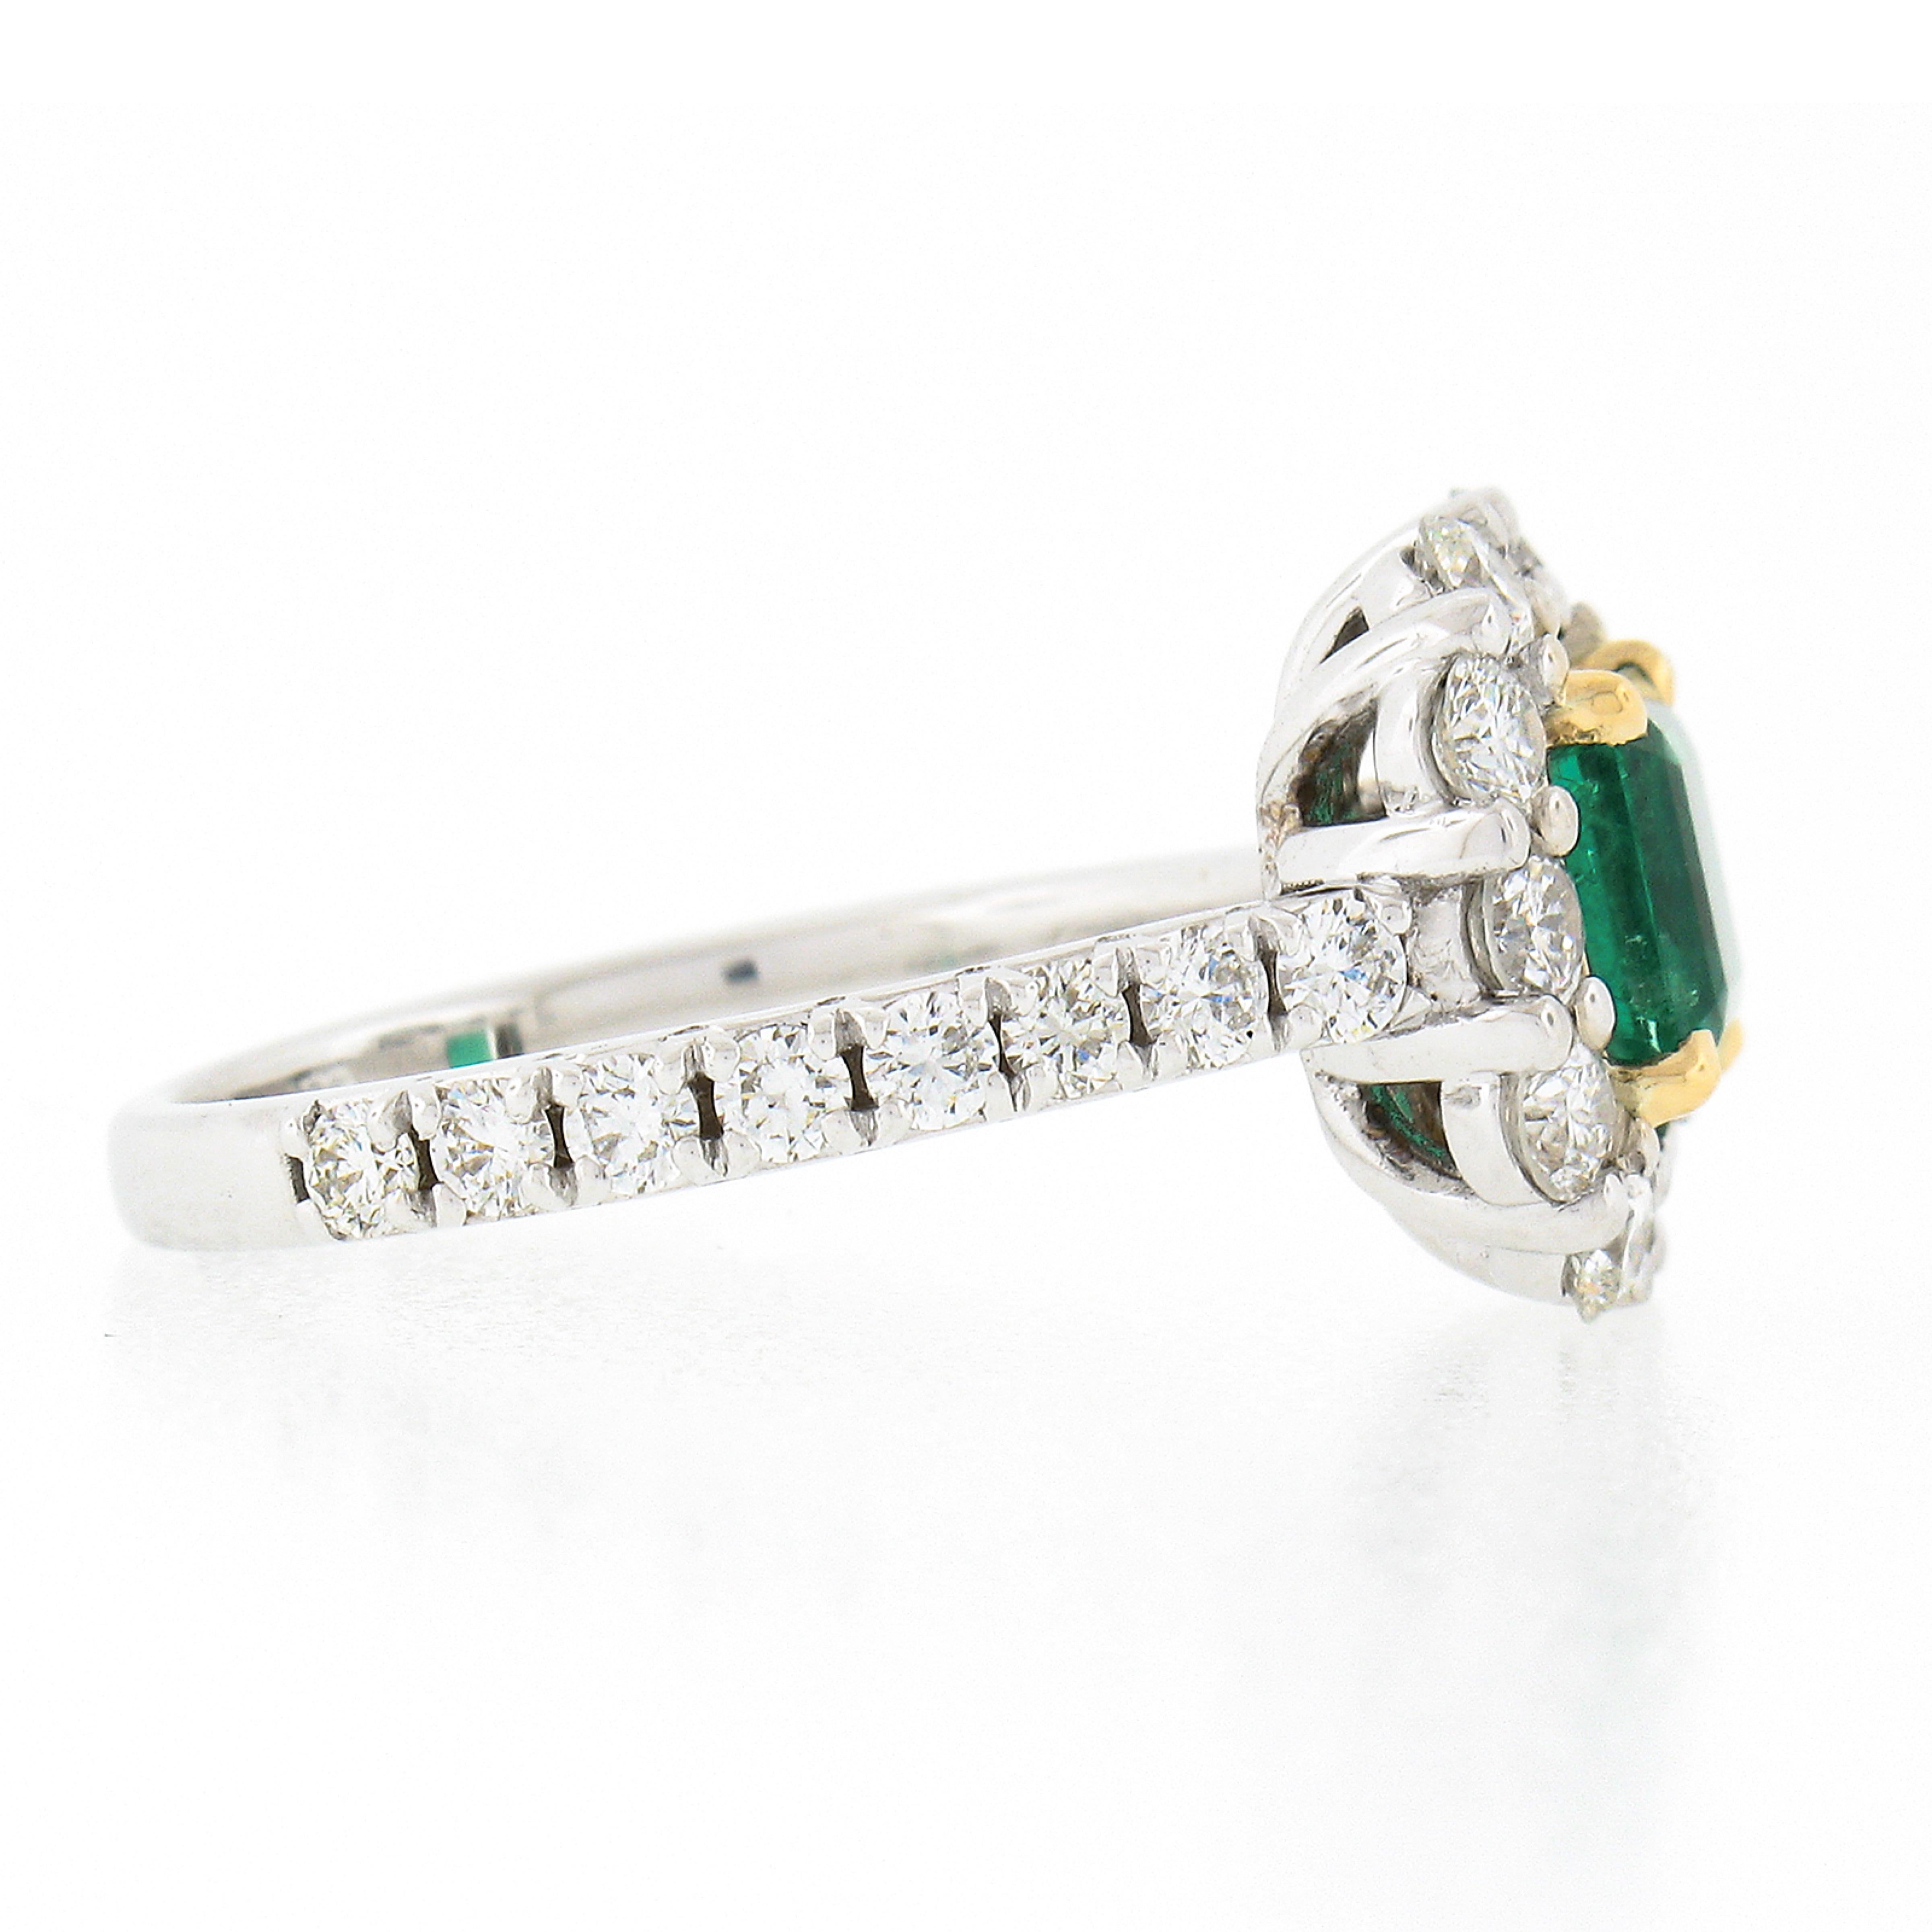 New 18k TT Gold 2.51ctw GIA Colombia Green Emerald w/ Diamond Halo Cocktail Ring In New Condition For Sale In Montclair, NJ